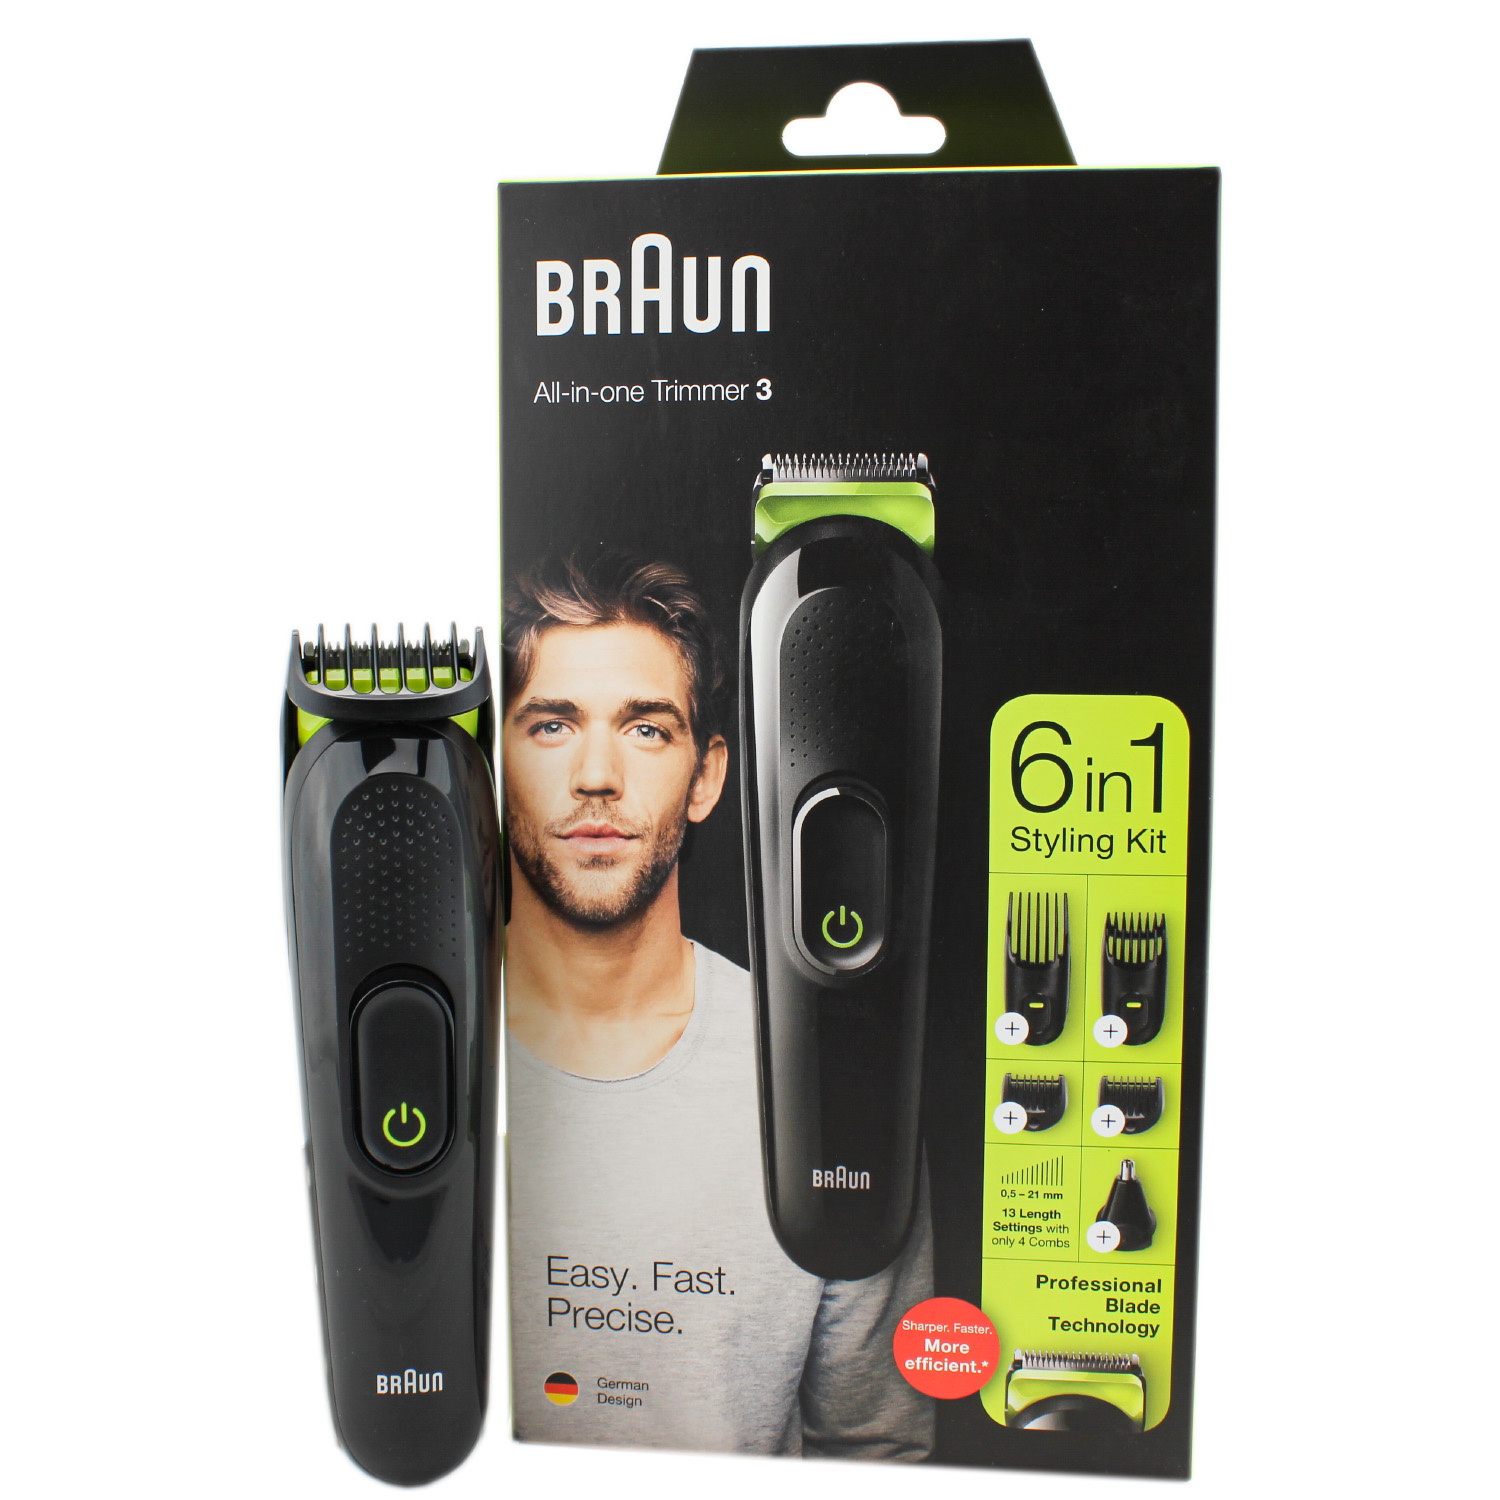 Braun All-In-One Trimmer3 MGK3221 6in1 Styling Kit